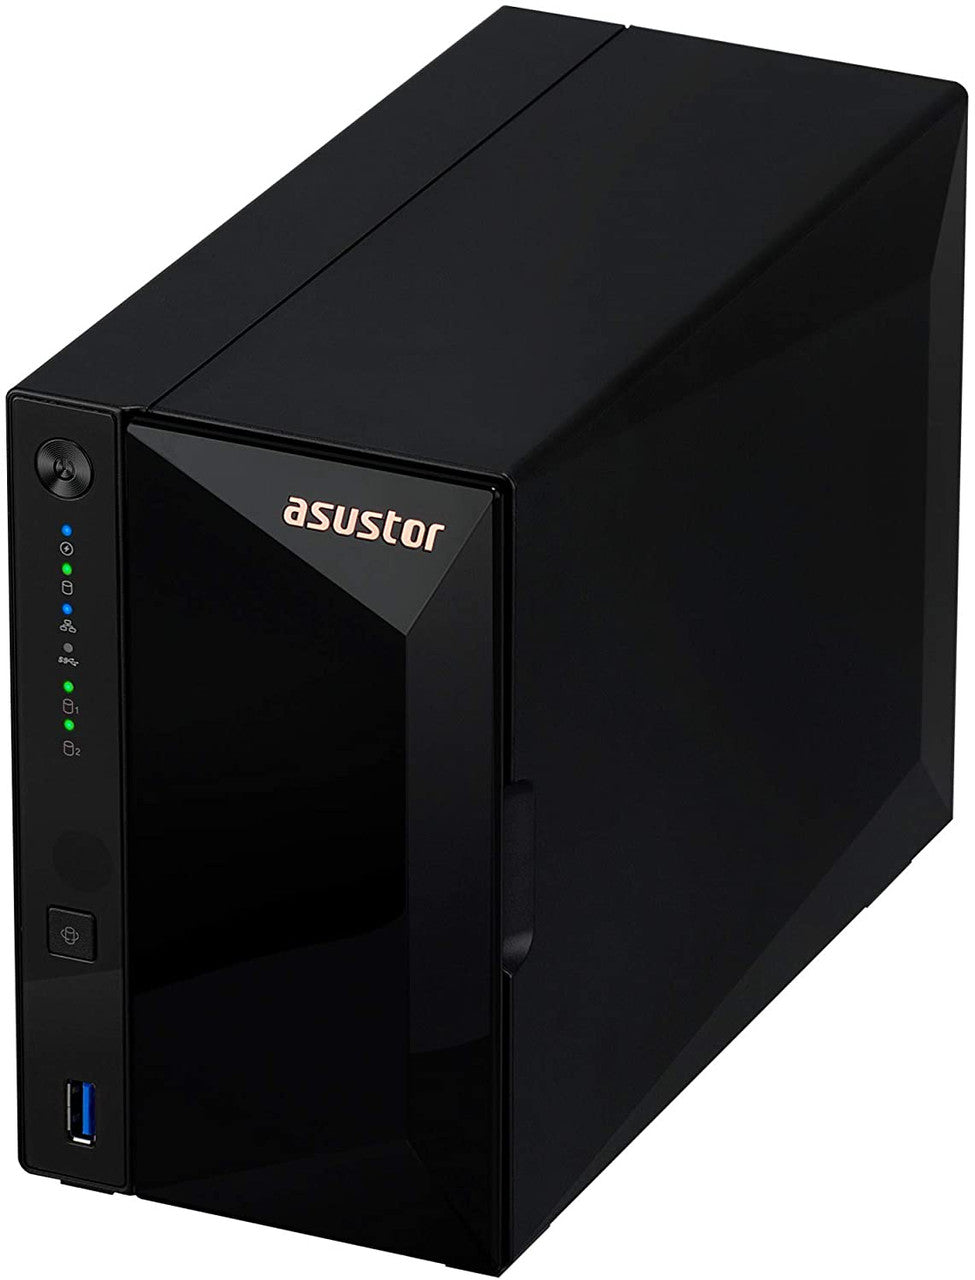 Asustor AS3302T 2-Bay Drivestor 2 PRO NAS with 2GB RAM and 24TB (2x12TB) Western Digital RED PRO Drives Fully Assembled and Tested